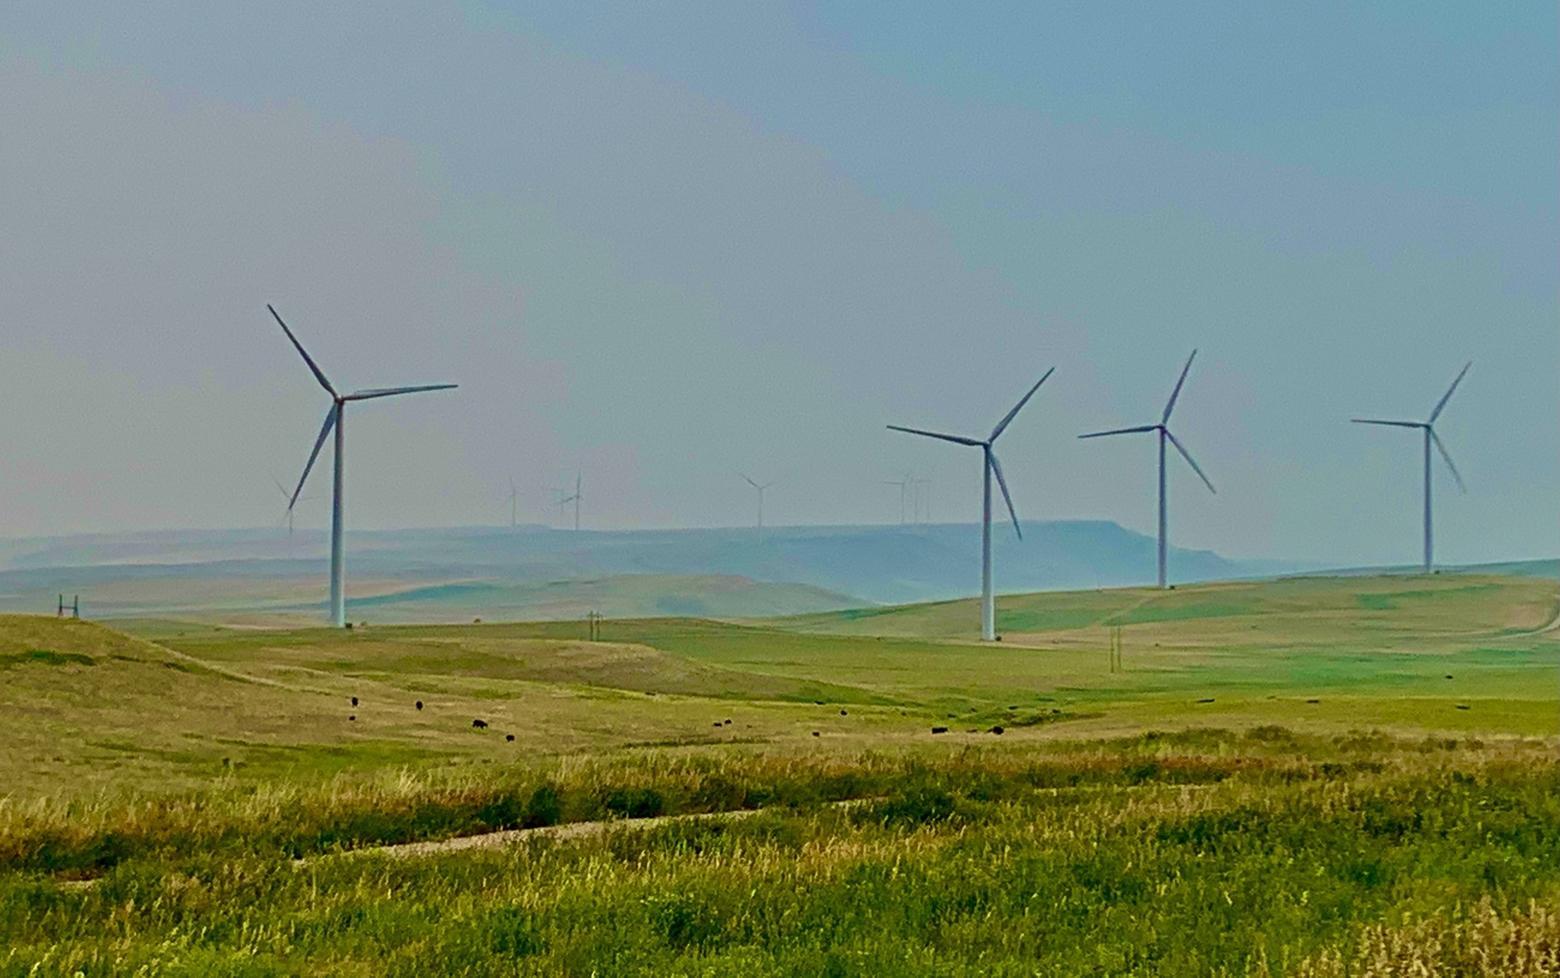 Wind farms are growing across the West, including here in central Montana's Judith Basin. But with increasing electricity demand, David Marston writes that nuclear energy may be a key contributor to a solution. Photo by Todd Wilkinson